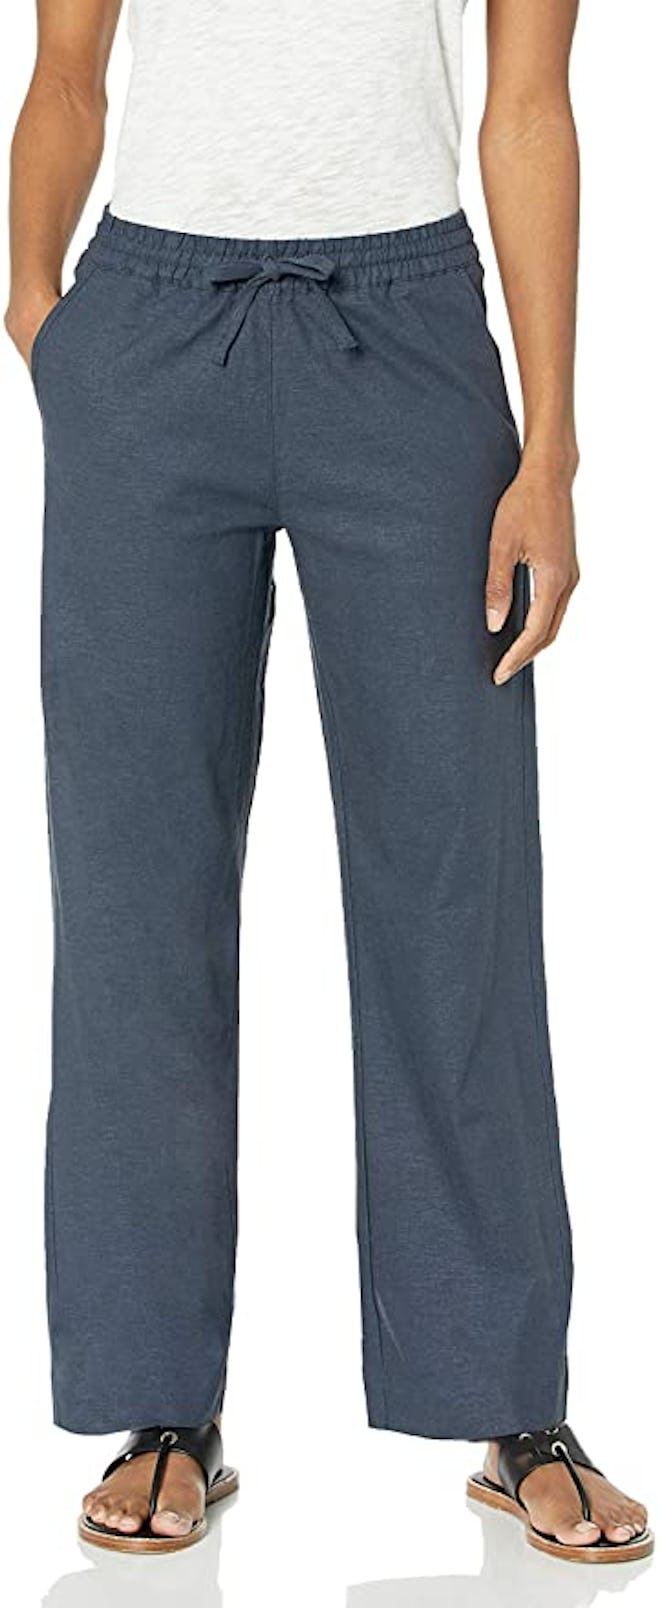 28 Palms Women's Stretch Linen Pant with Drawstring